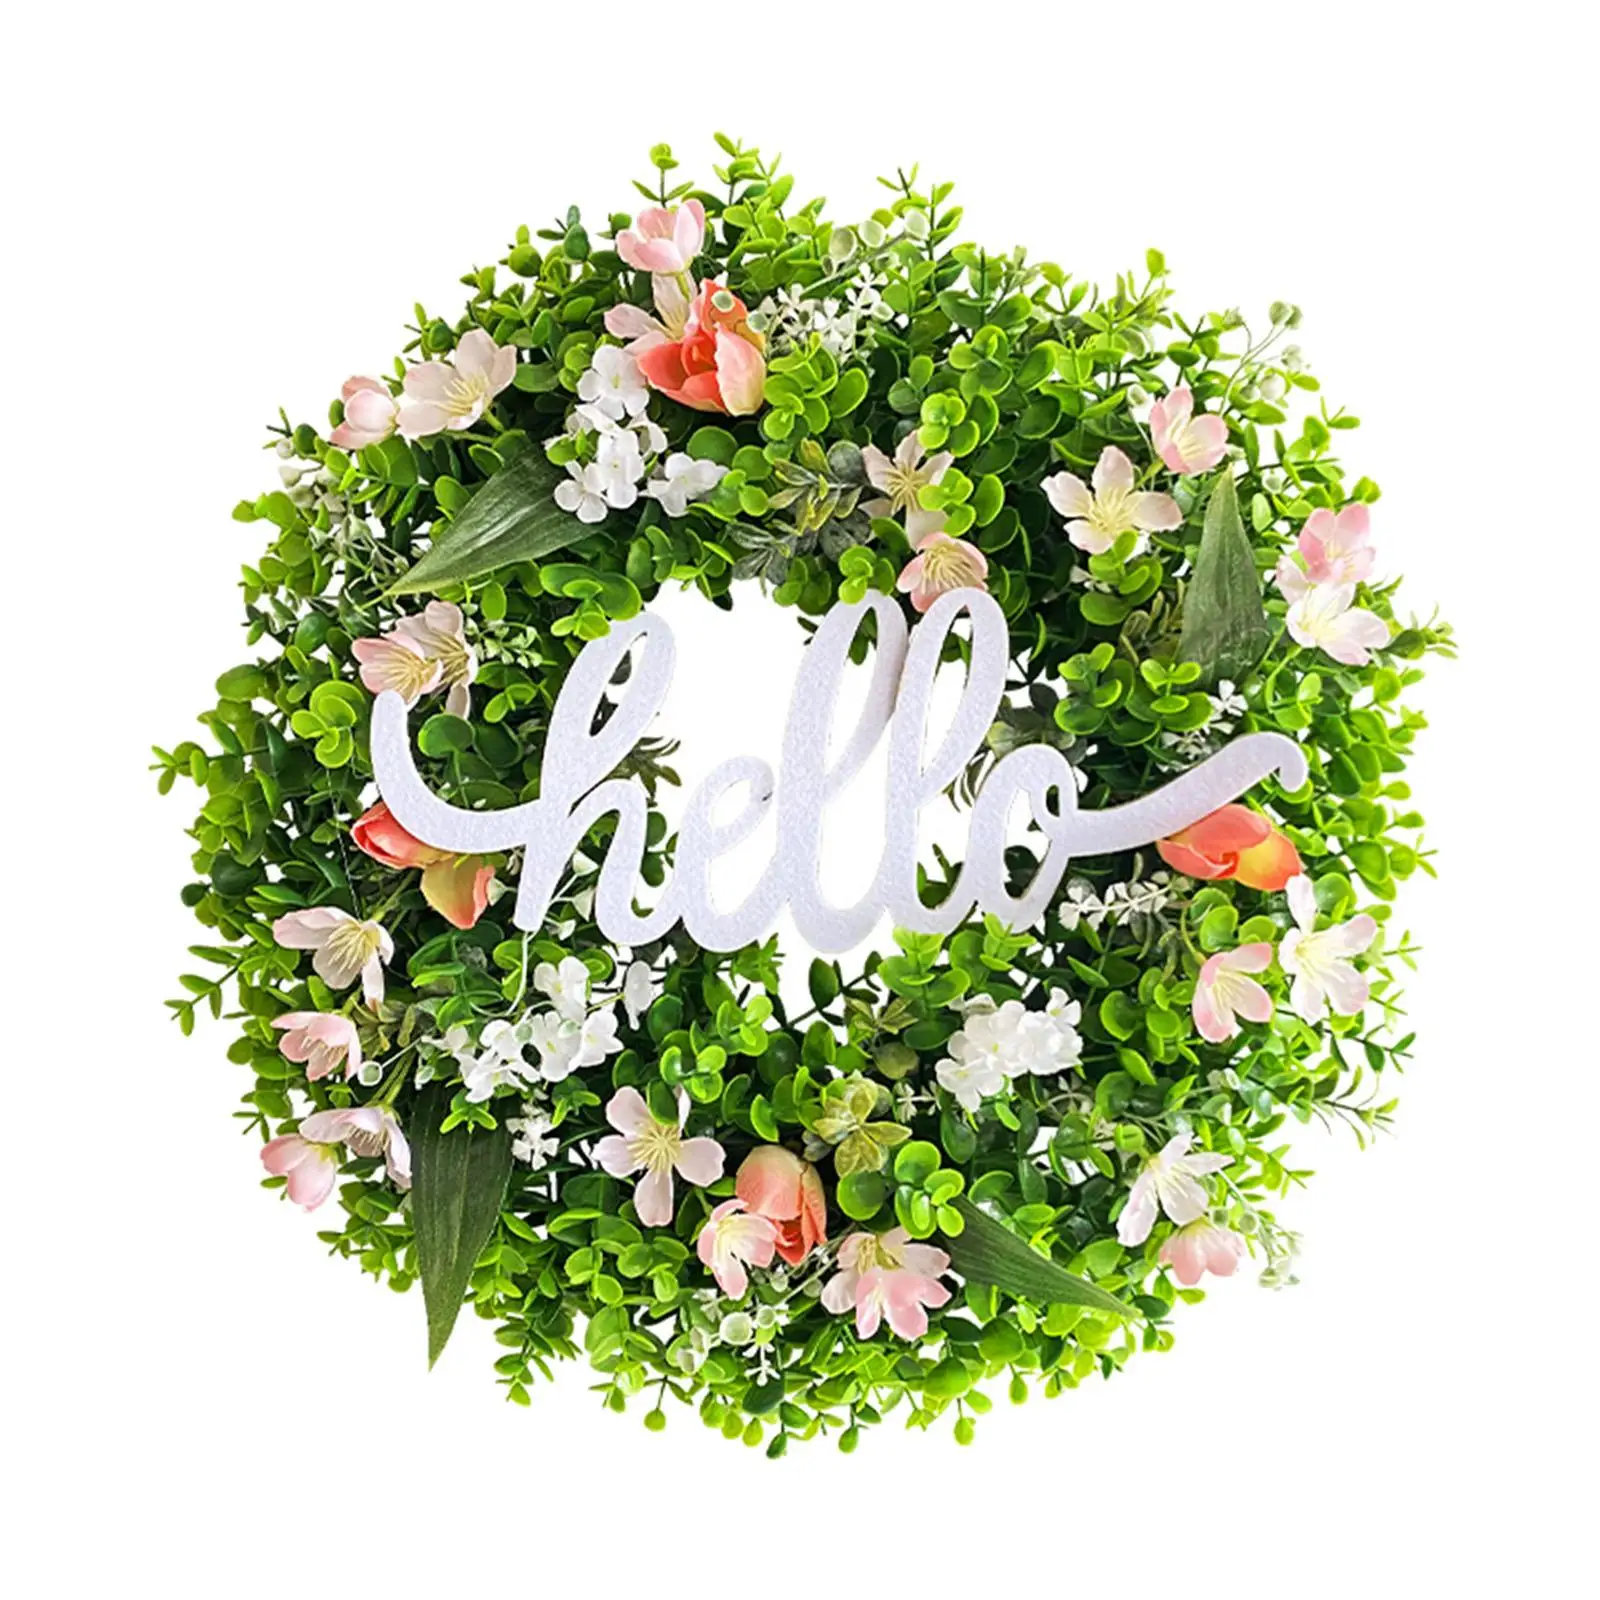 Spring Wreath Artificial Flower Wreath Greenery Leaves Wreath for Holiday